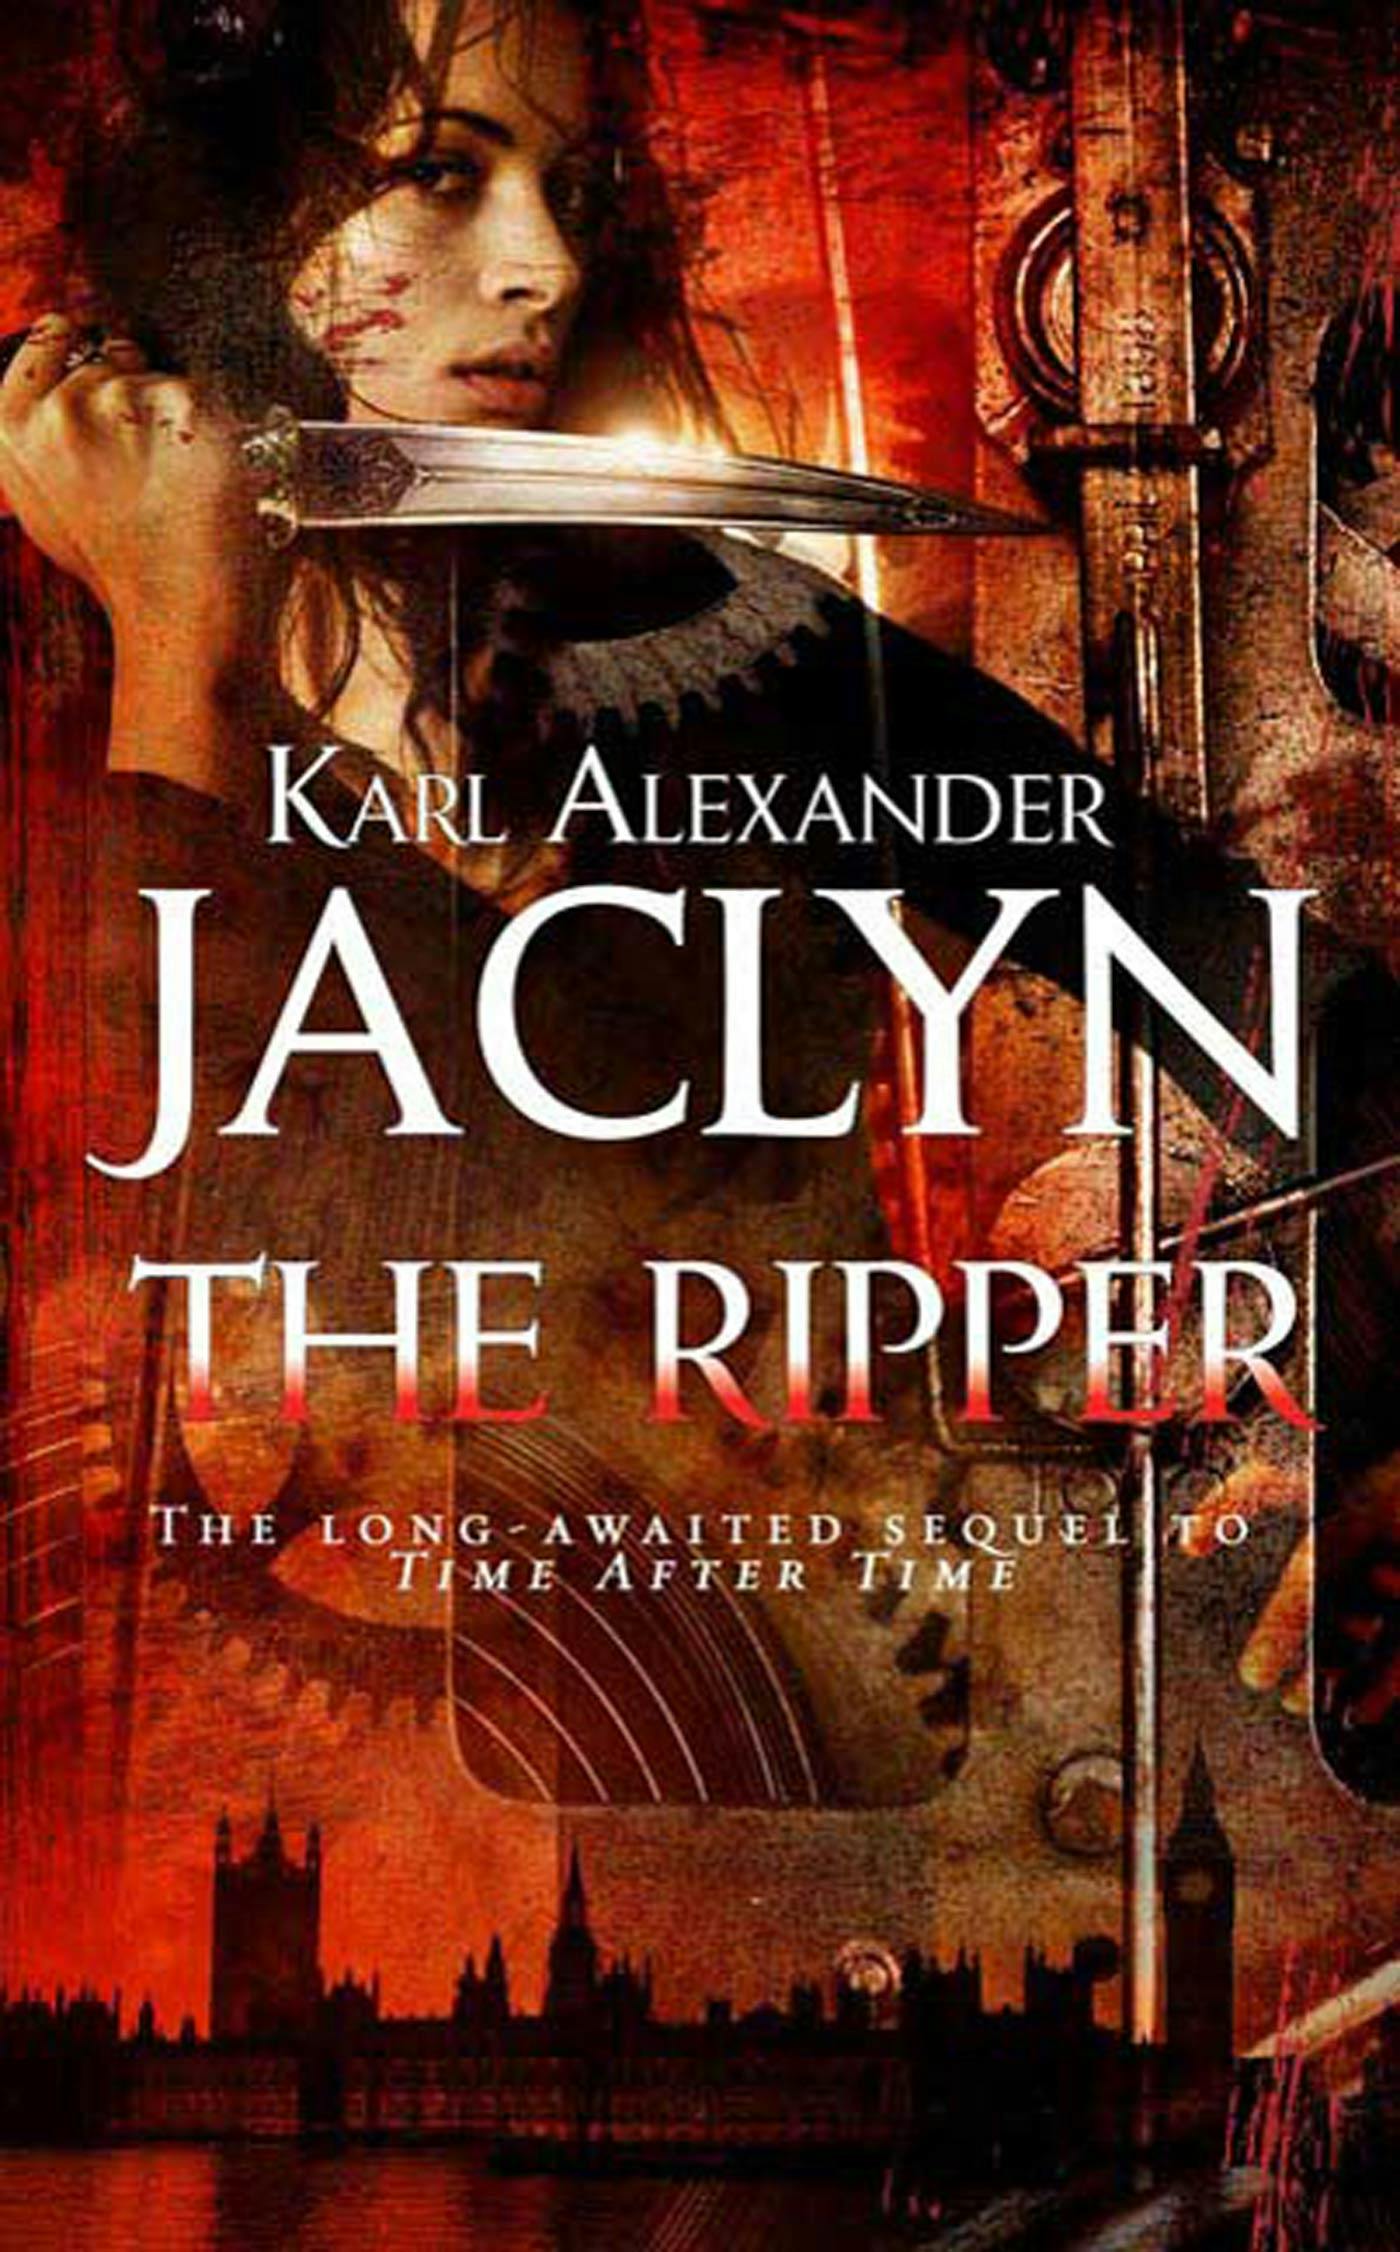 Cover for the book titled as: Jaclyn the Ripper